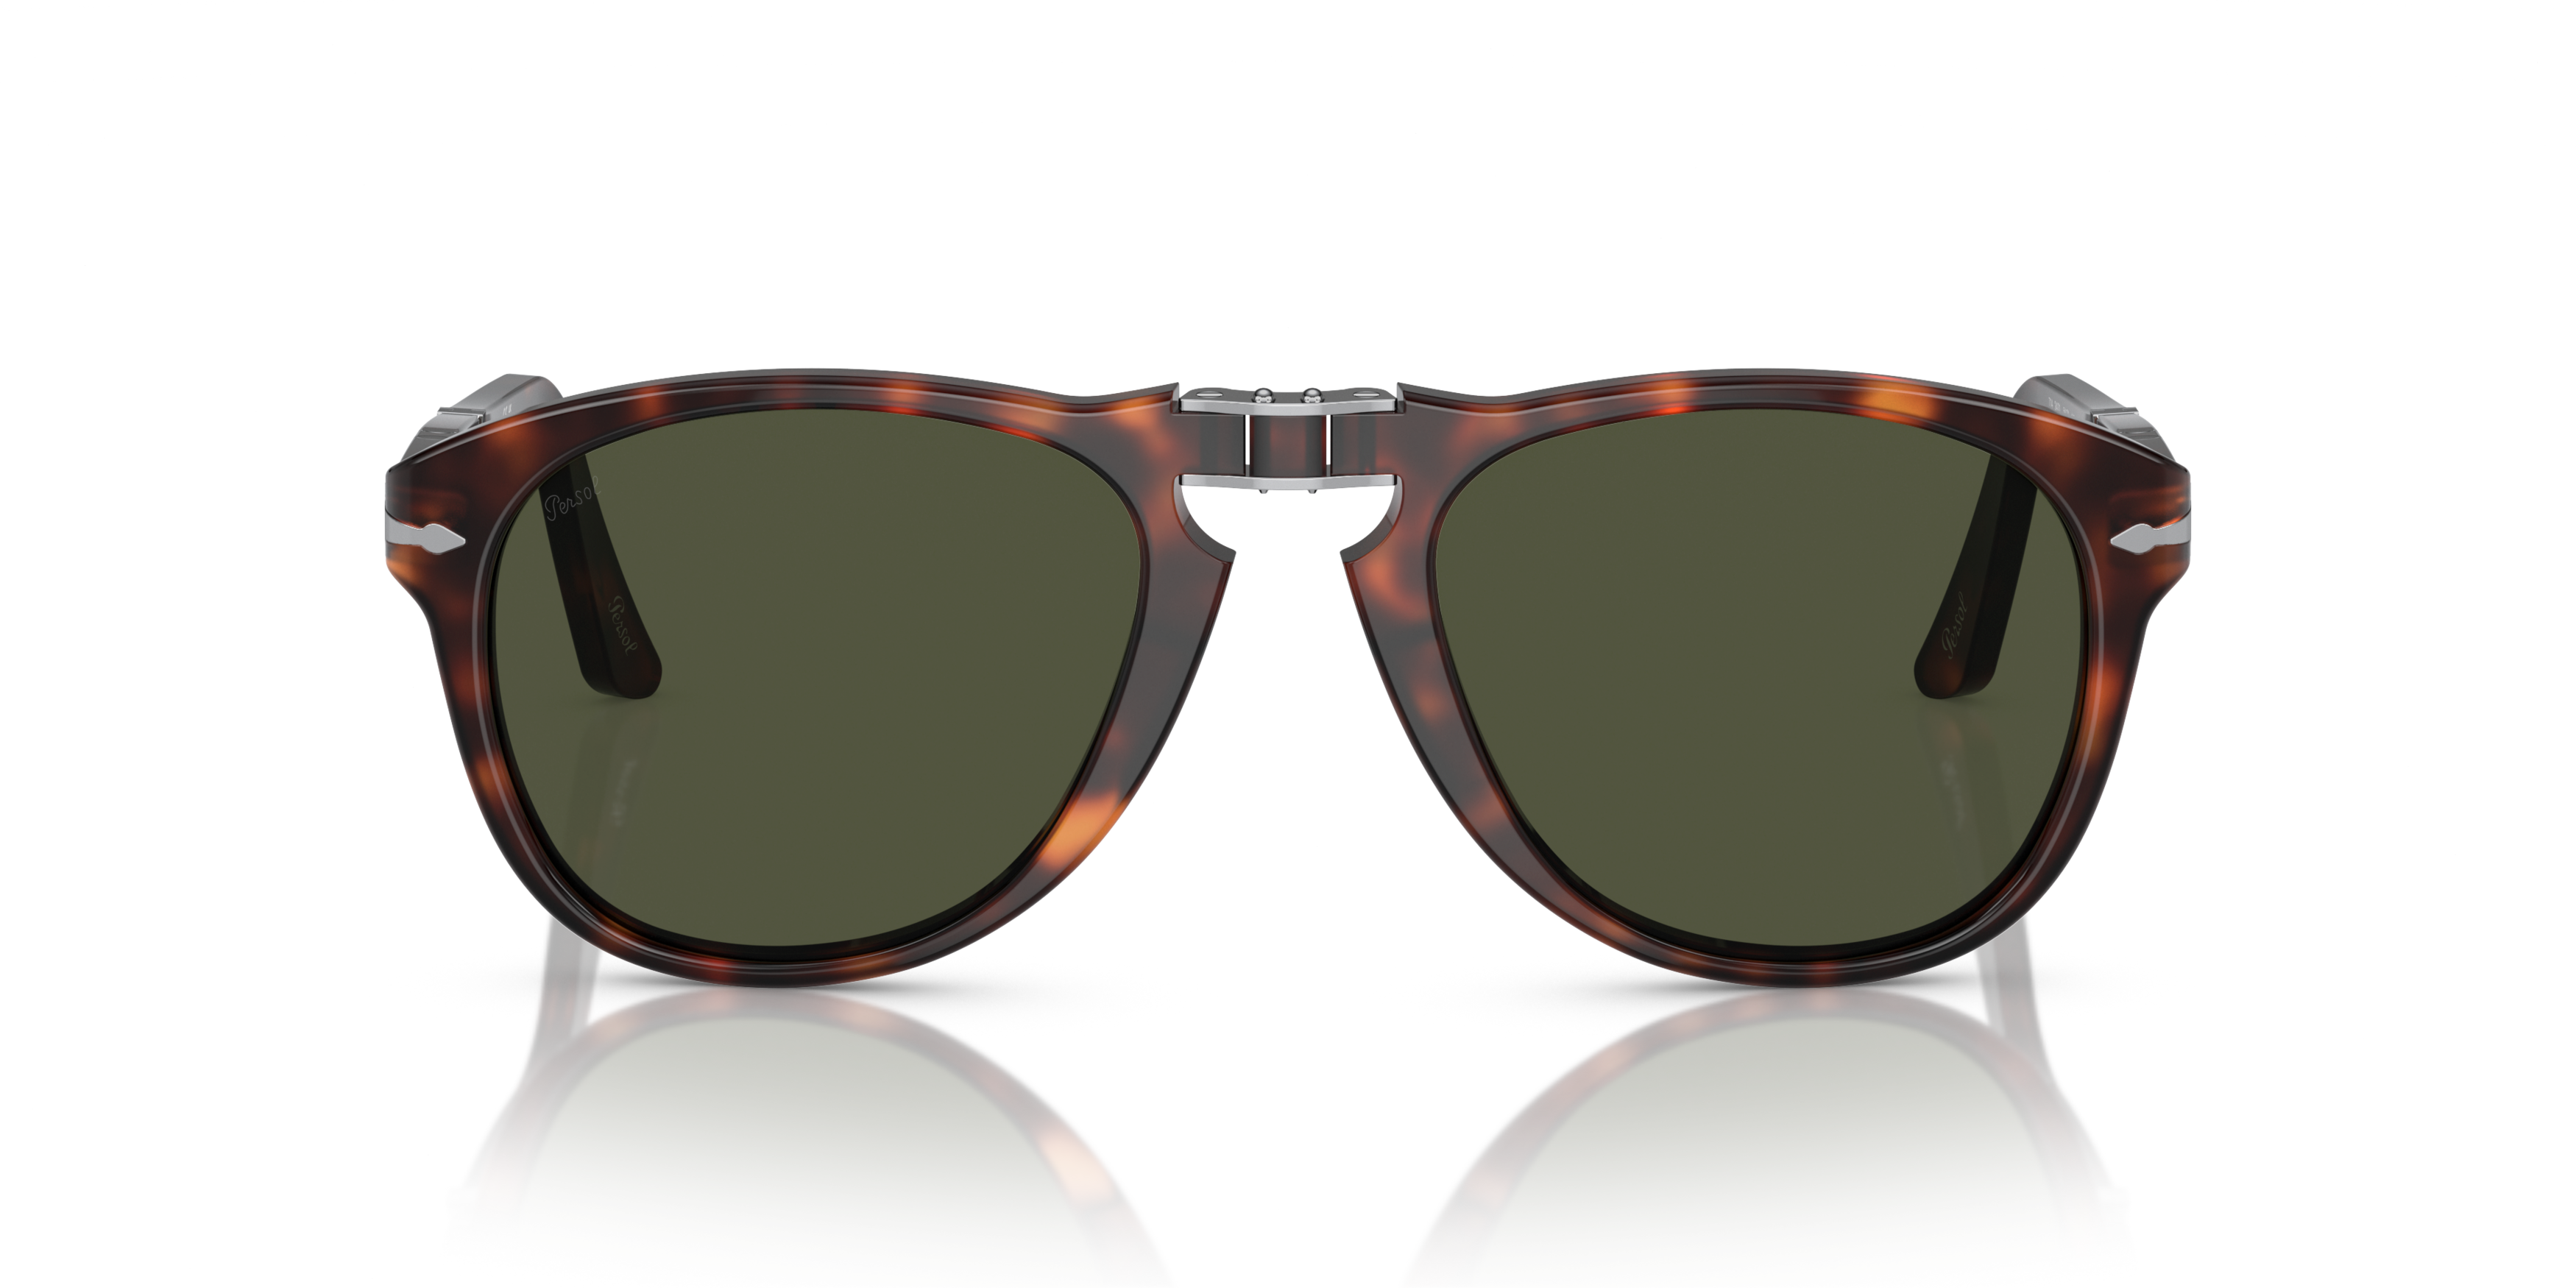 [products.image.front] Persol 0PO0714 24/31